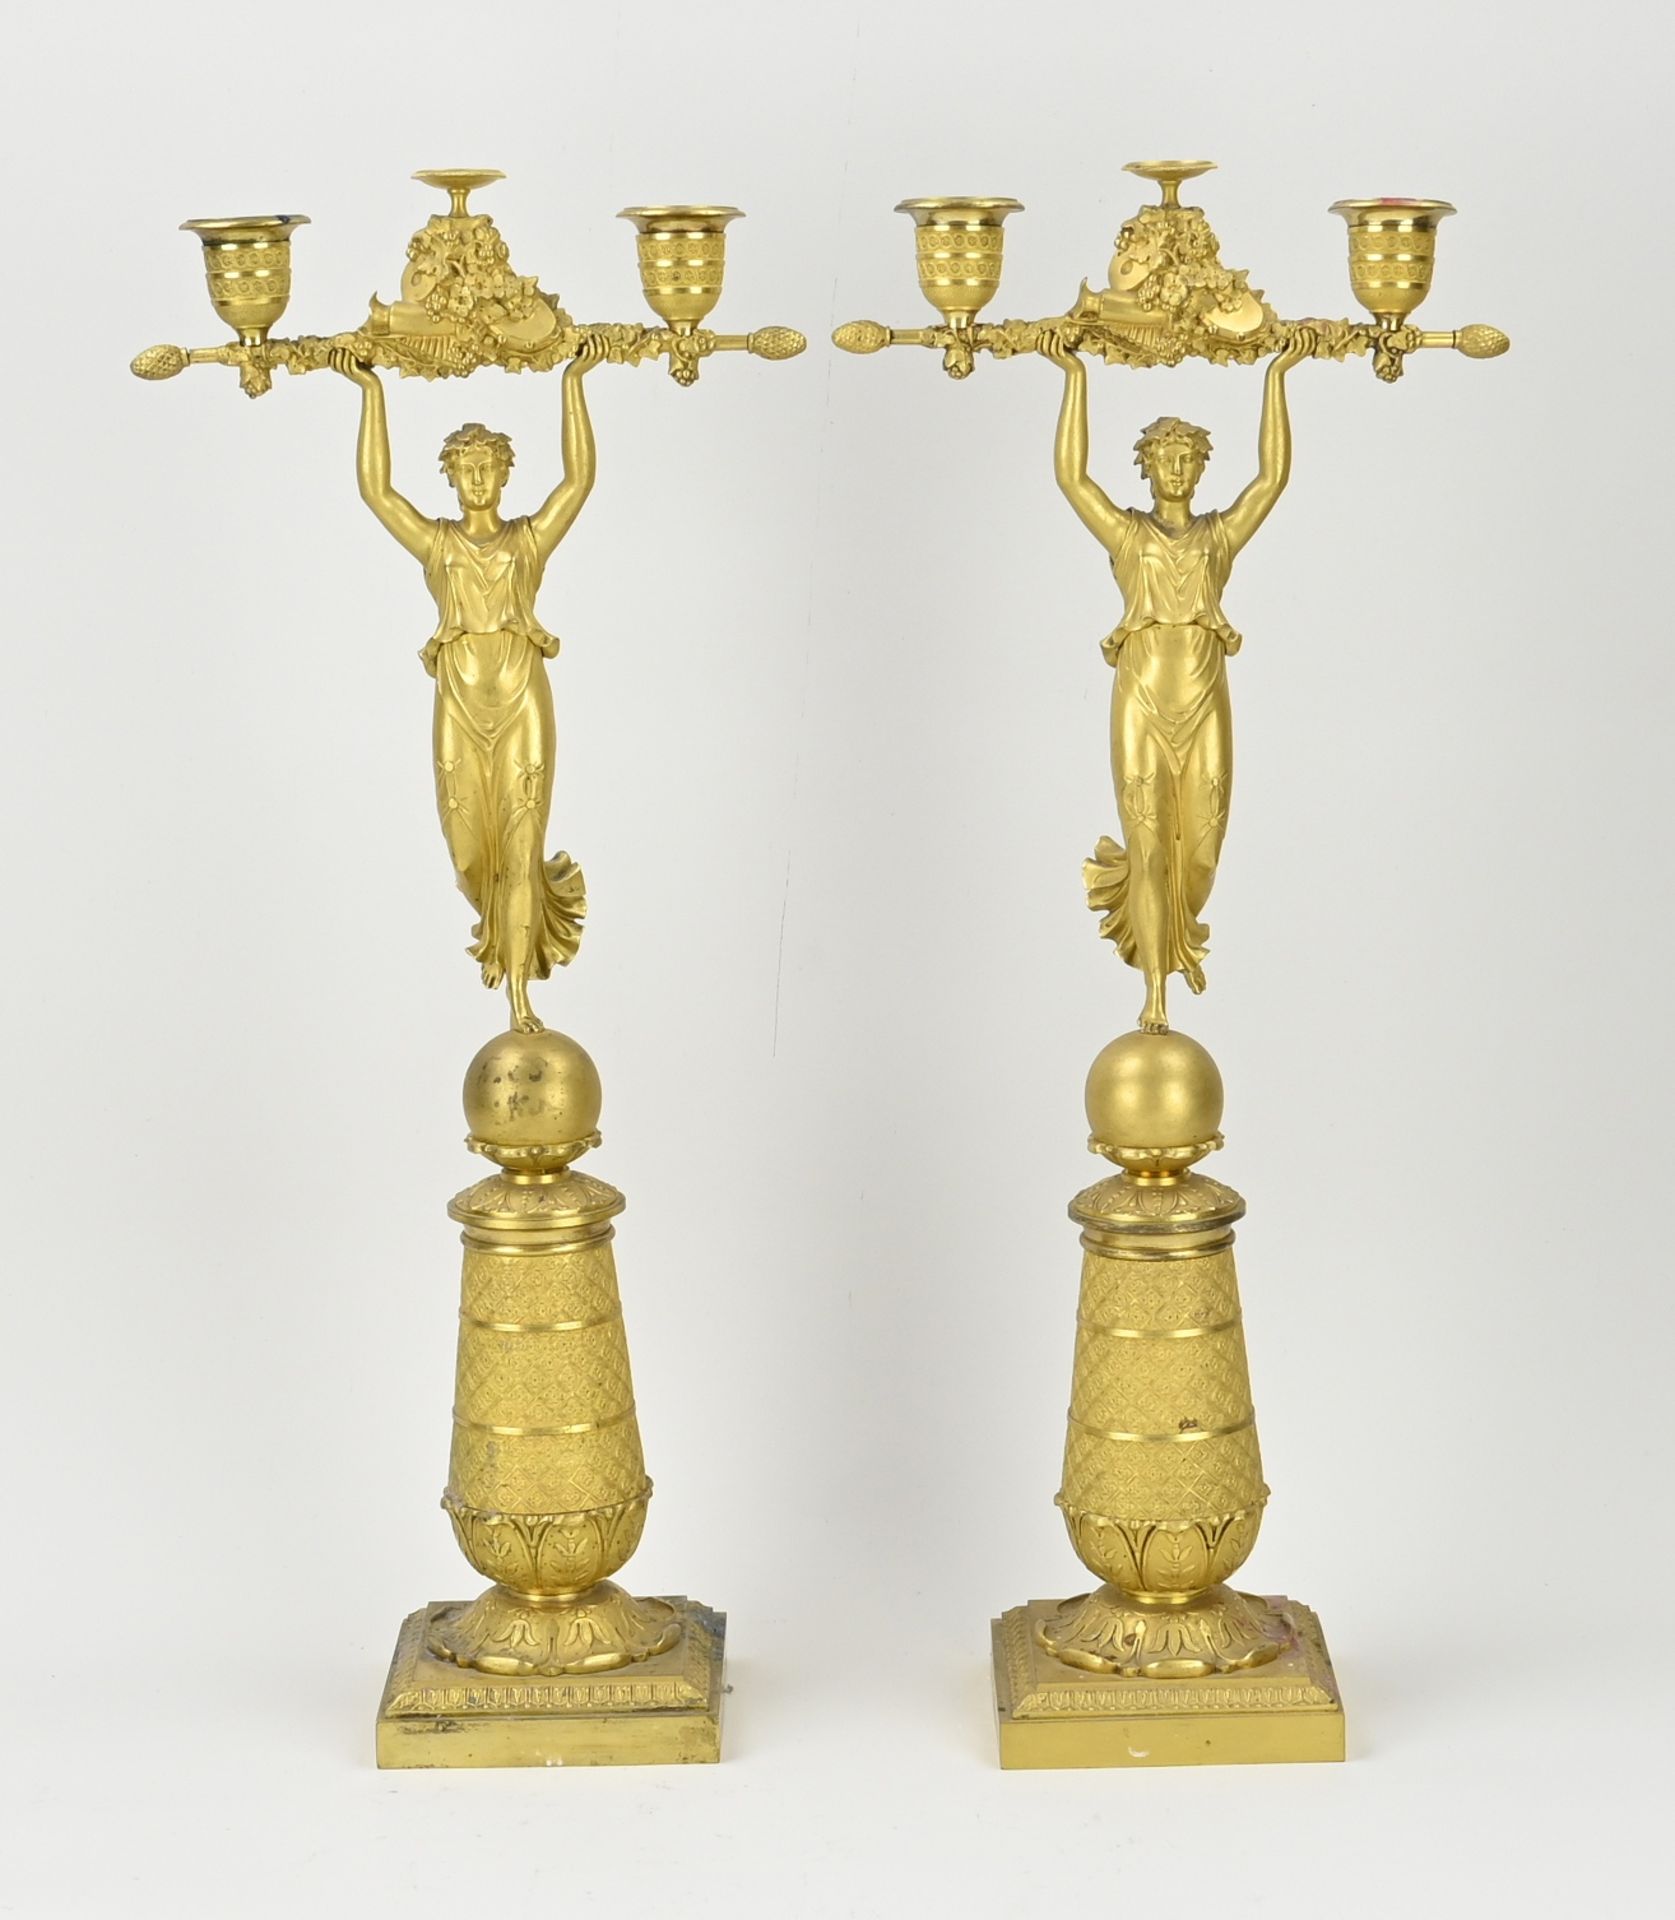 Two French Empire candlesticks, H 49 cm.